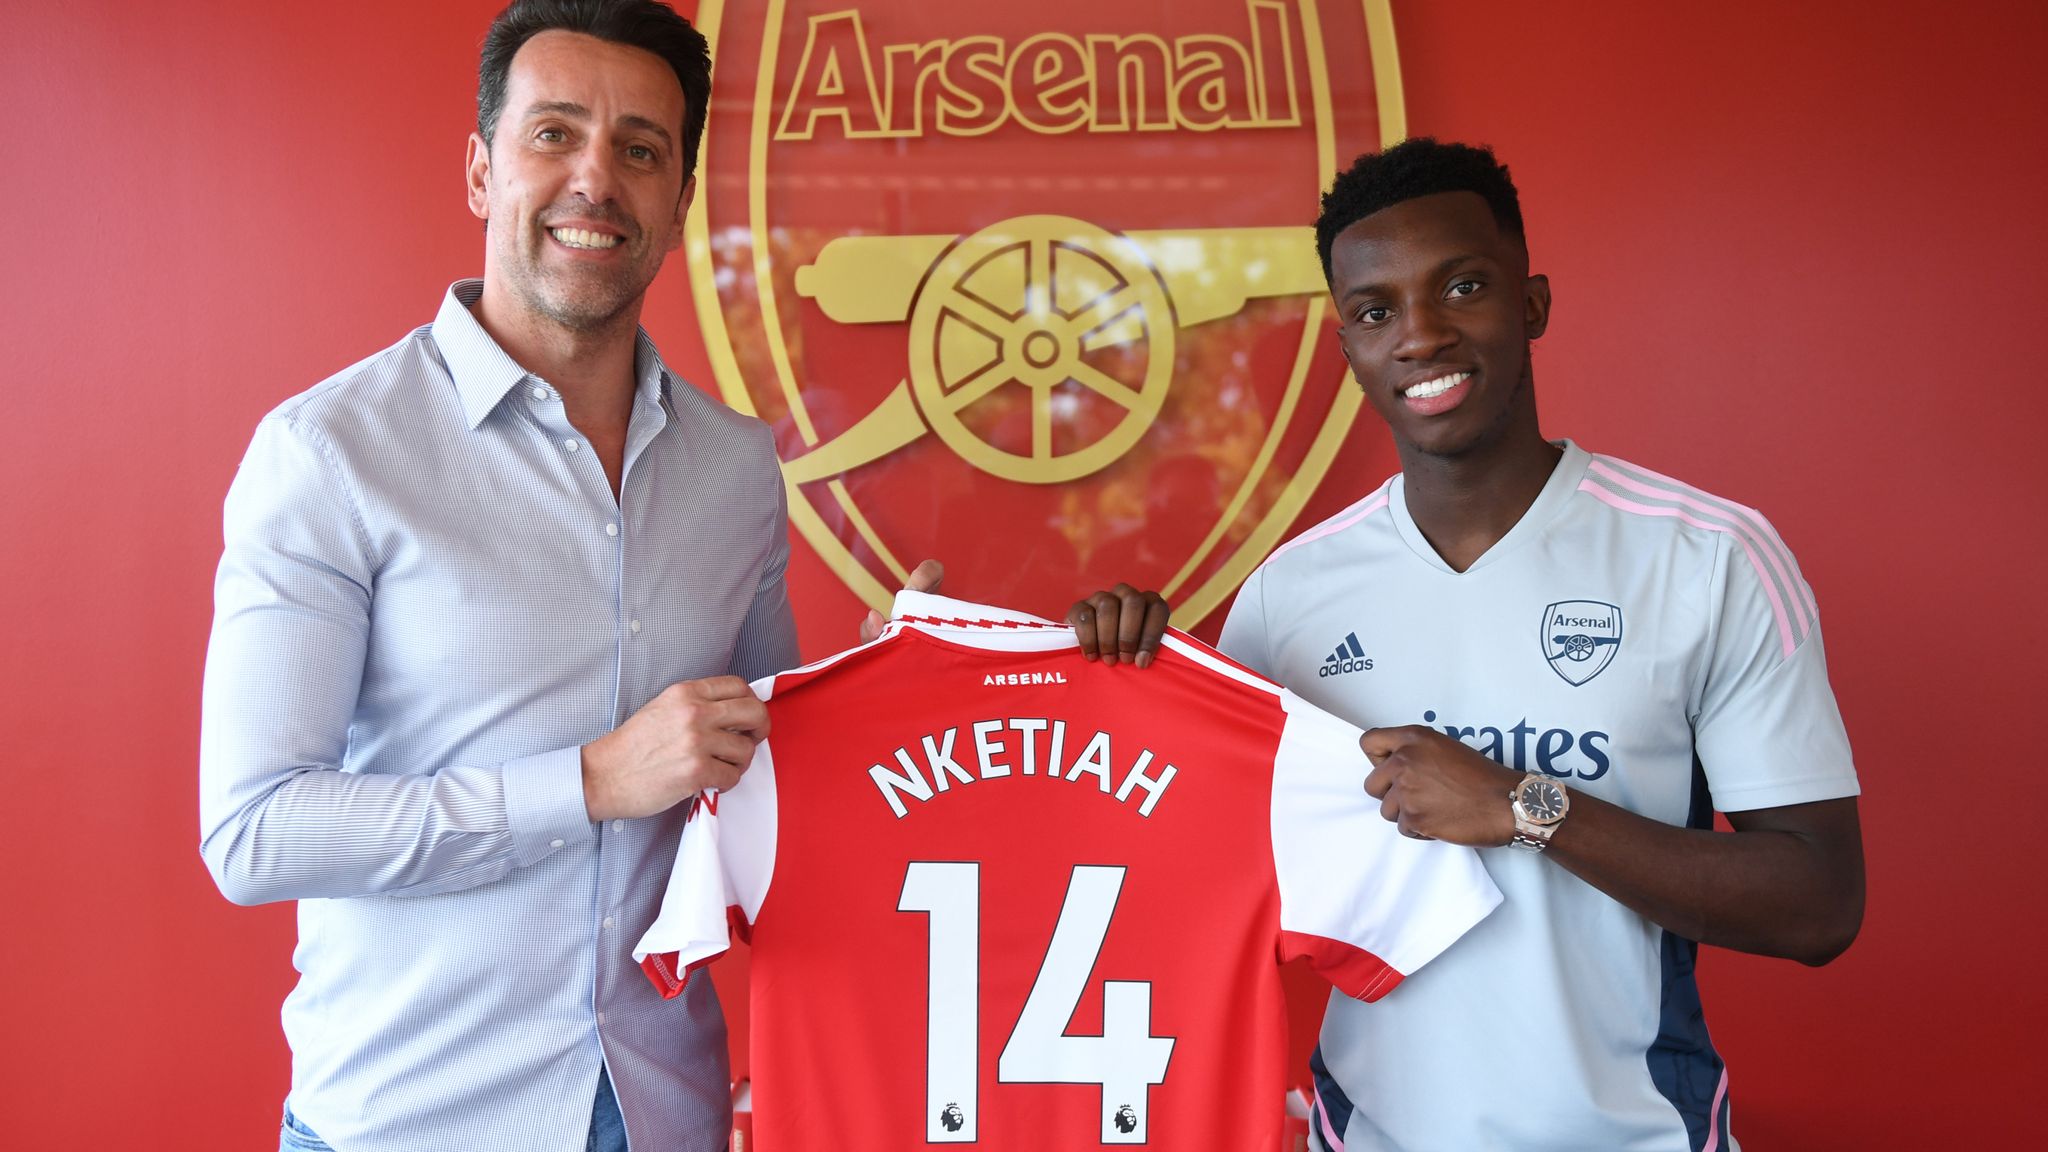 The young great striker has signed a new long-term contract with Arsenal